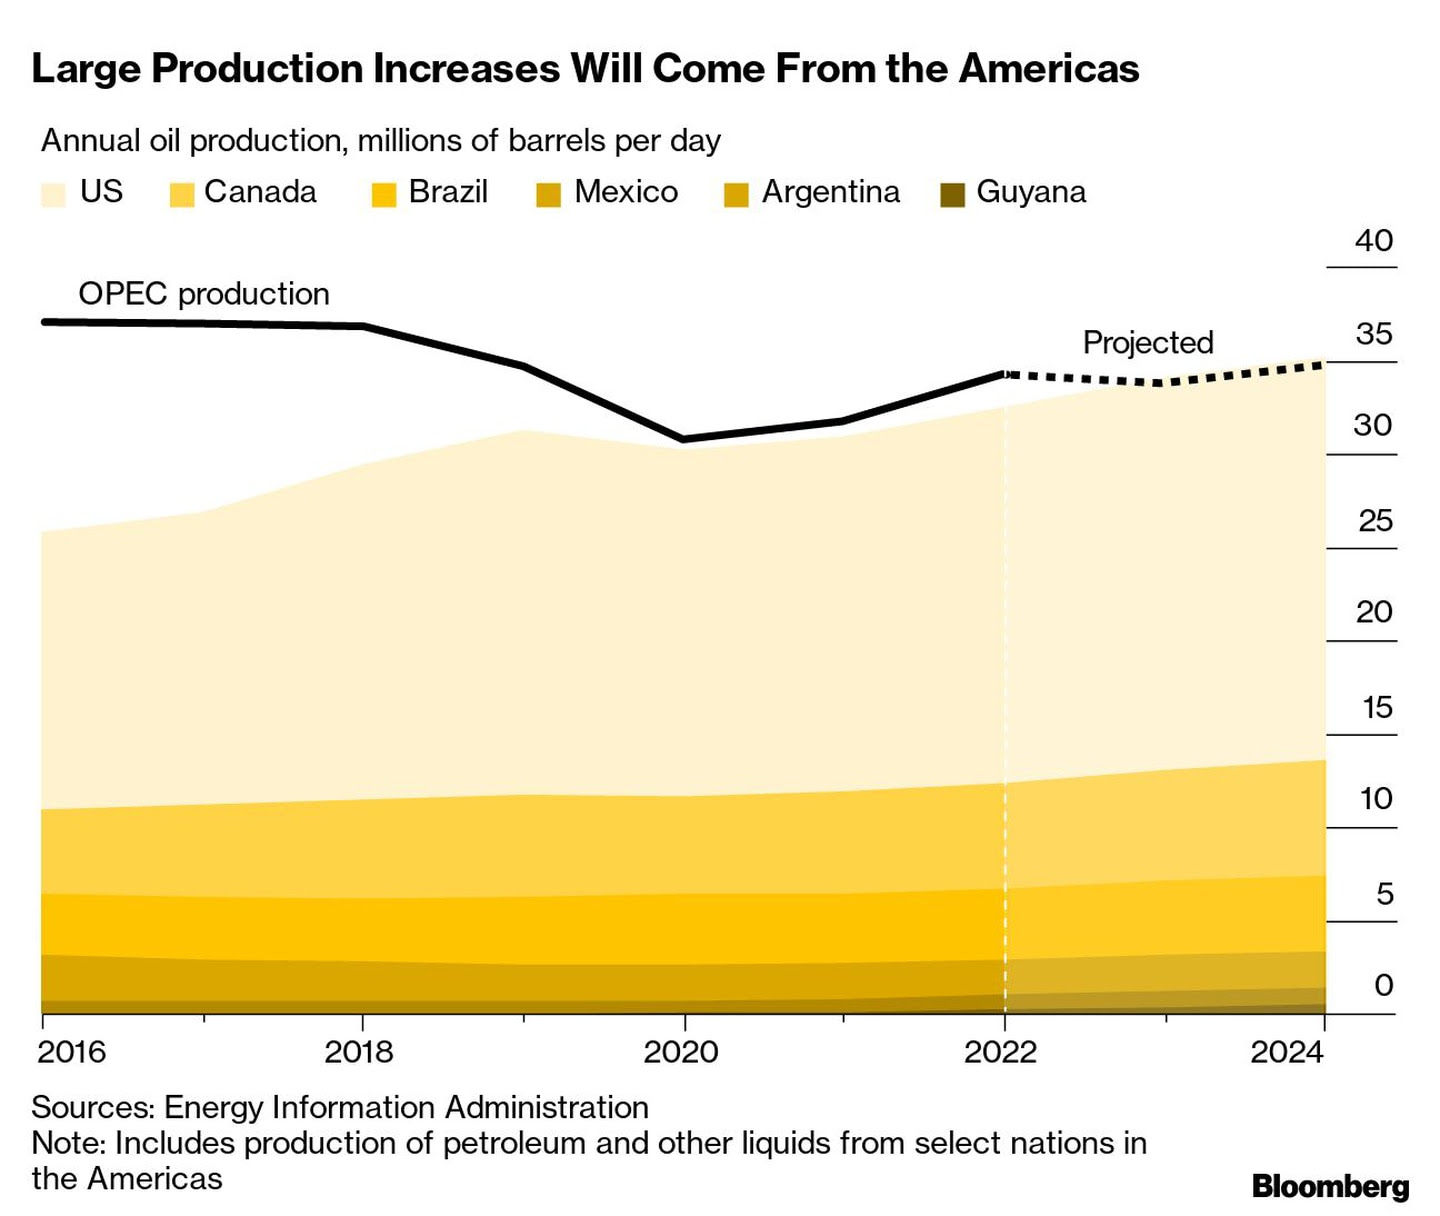 , Americas will have the highest oil growth after the OPEC cutback